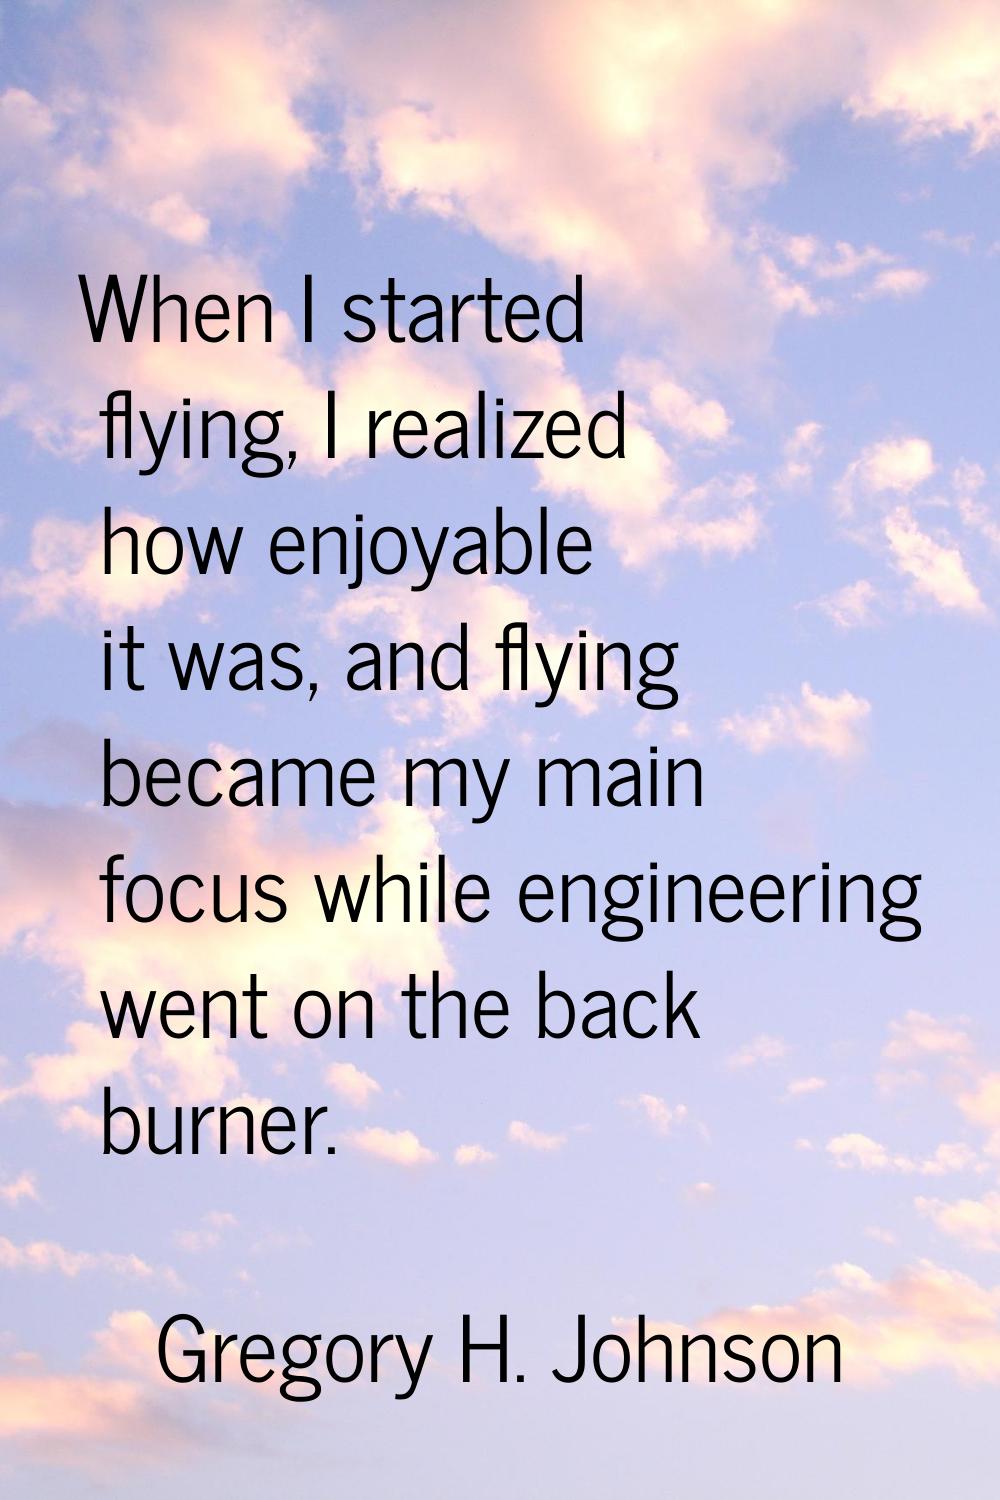 When I started flying, I realized how enjoyable it was, and flying became my main focus while engin